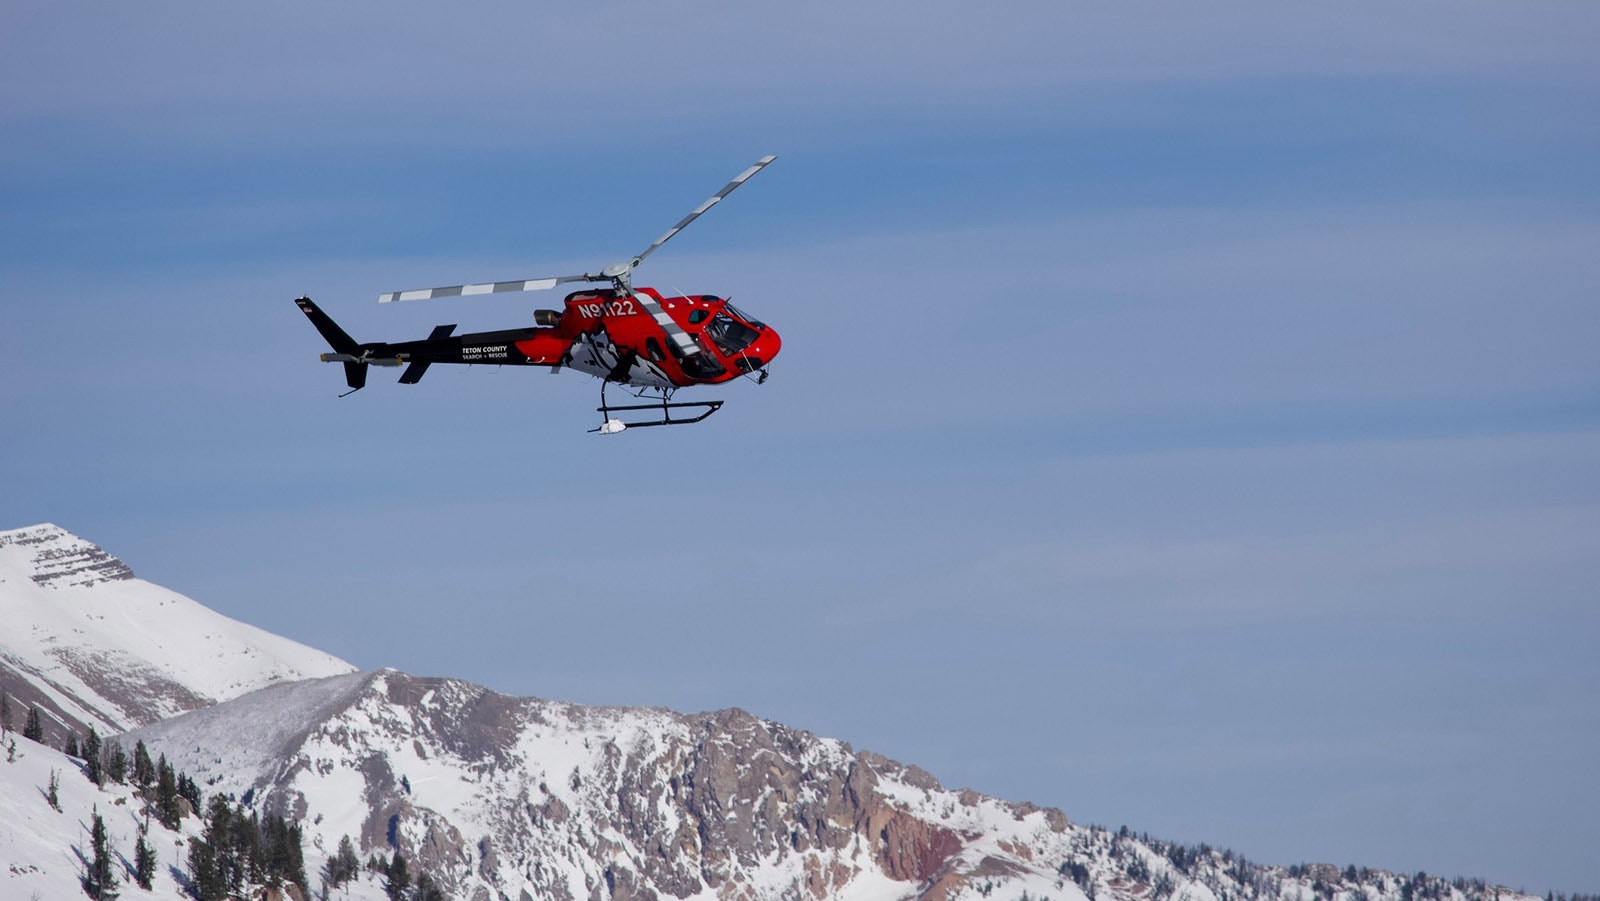 A Teton County Search and Rescue helicopter on its way to Prater Canyon to retrieve a skier caught in an avalanche.